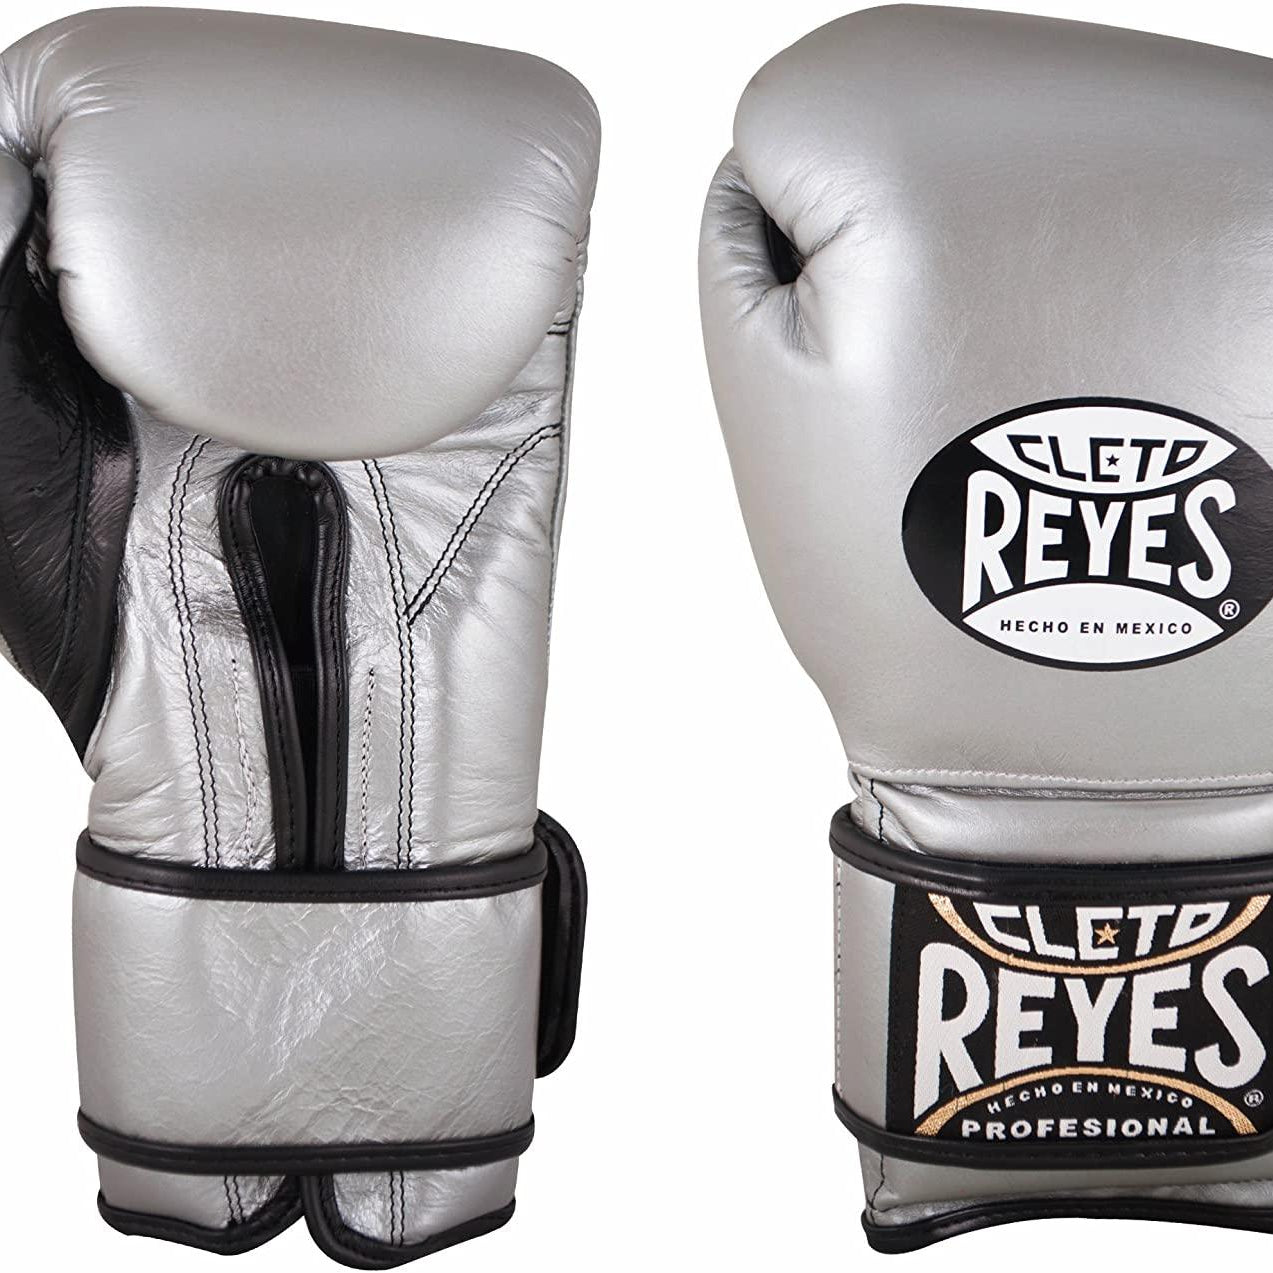 CLETO REYES Velcro Boxing Sparring Gloves - Sold as seen - RINGMASTER SPORTS - Made For Champions